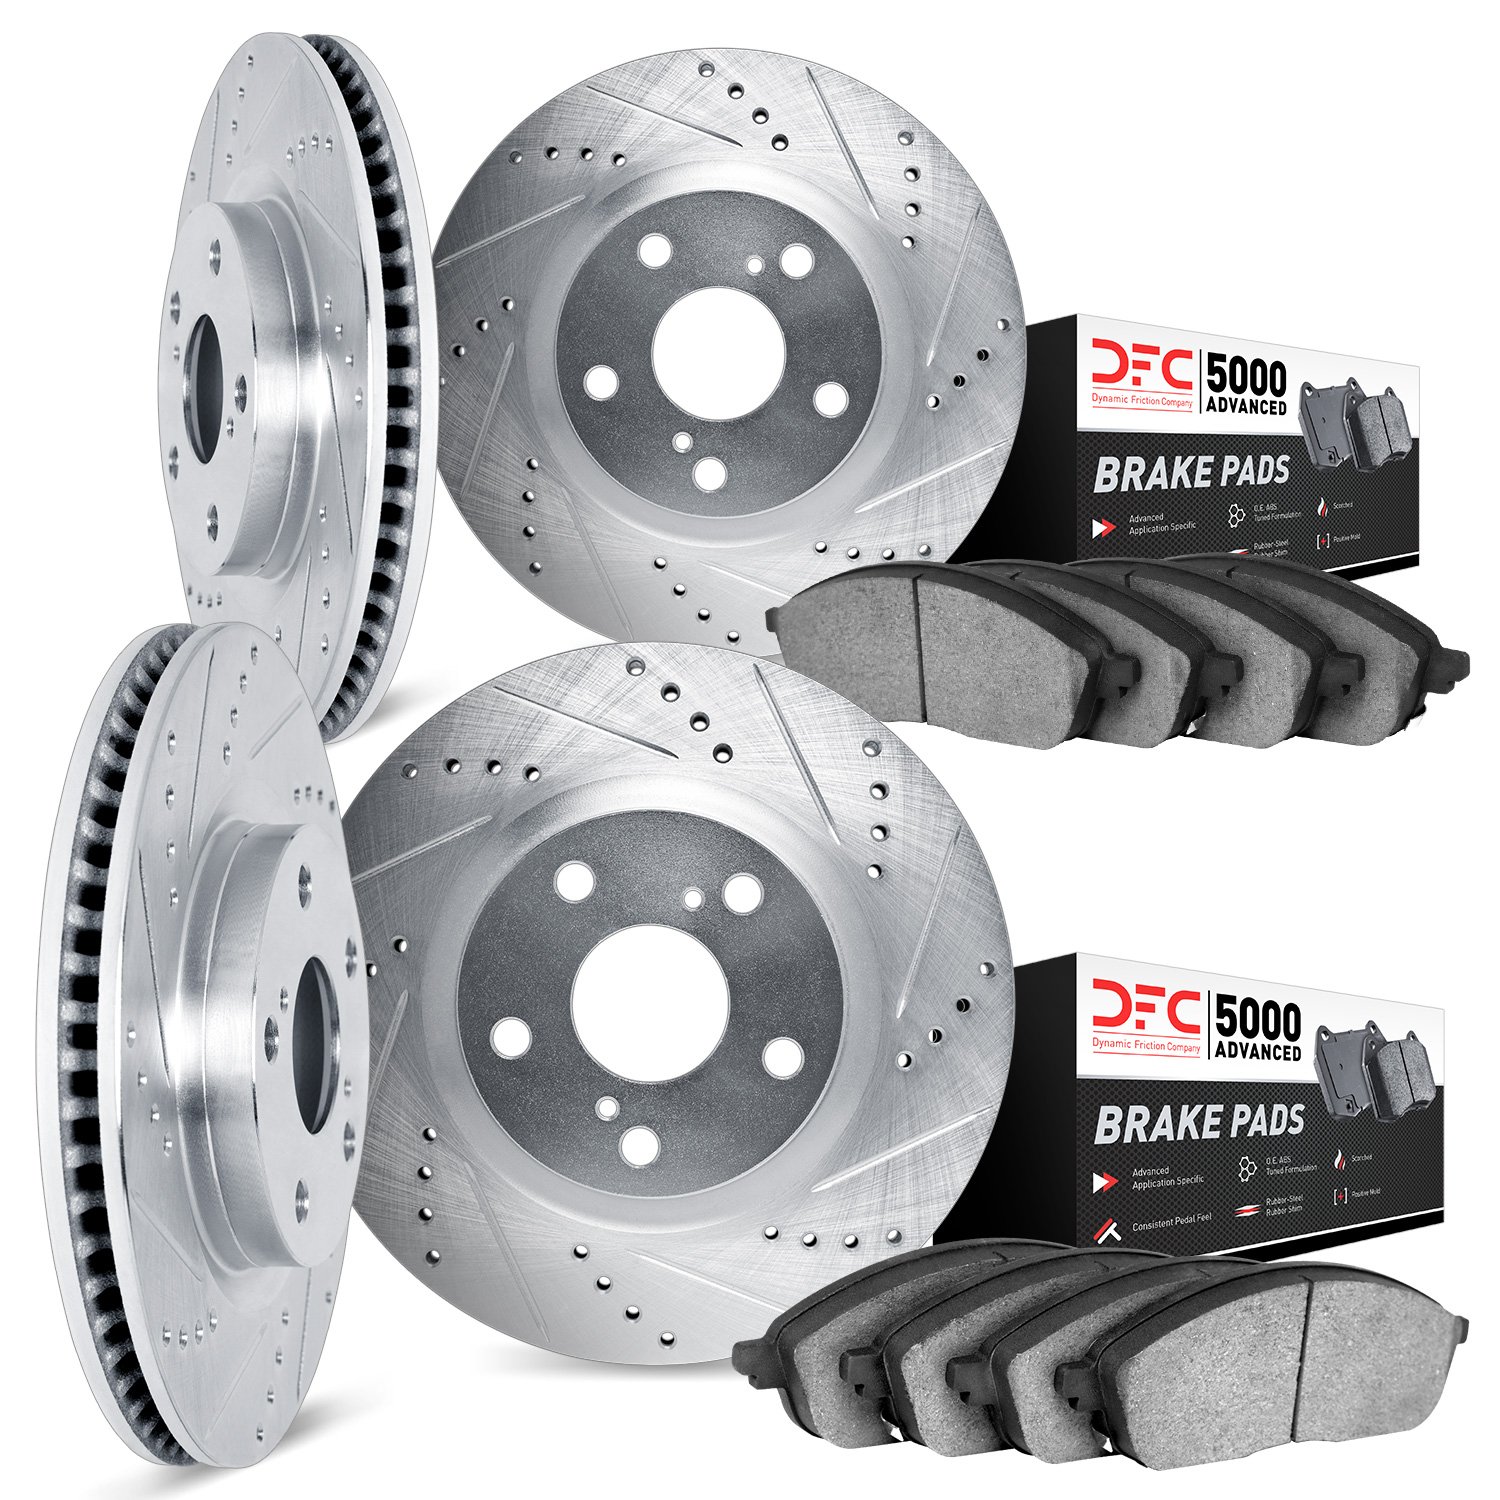 7504-31038 Drilled/Slotted Brake Rotors w/5000 Advanced Brake Pads Kit [Silver], 2012-2016 BMW, Position: Front and Rear